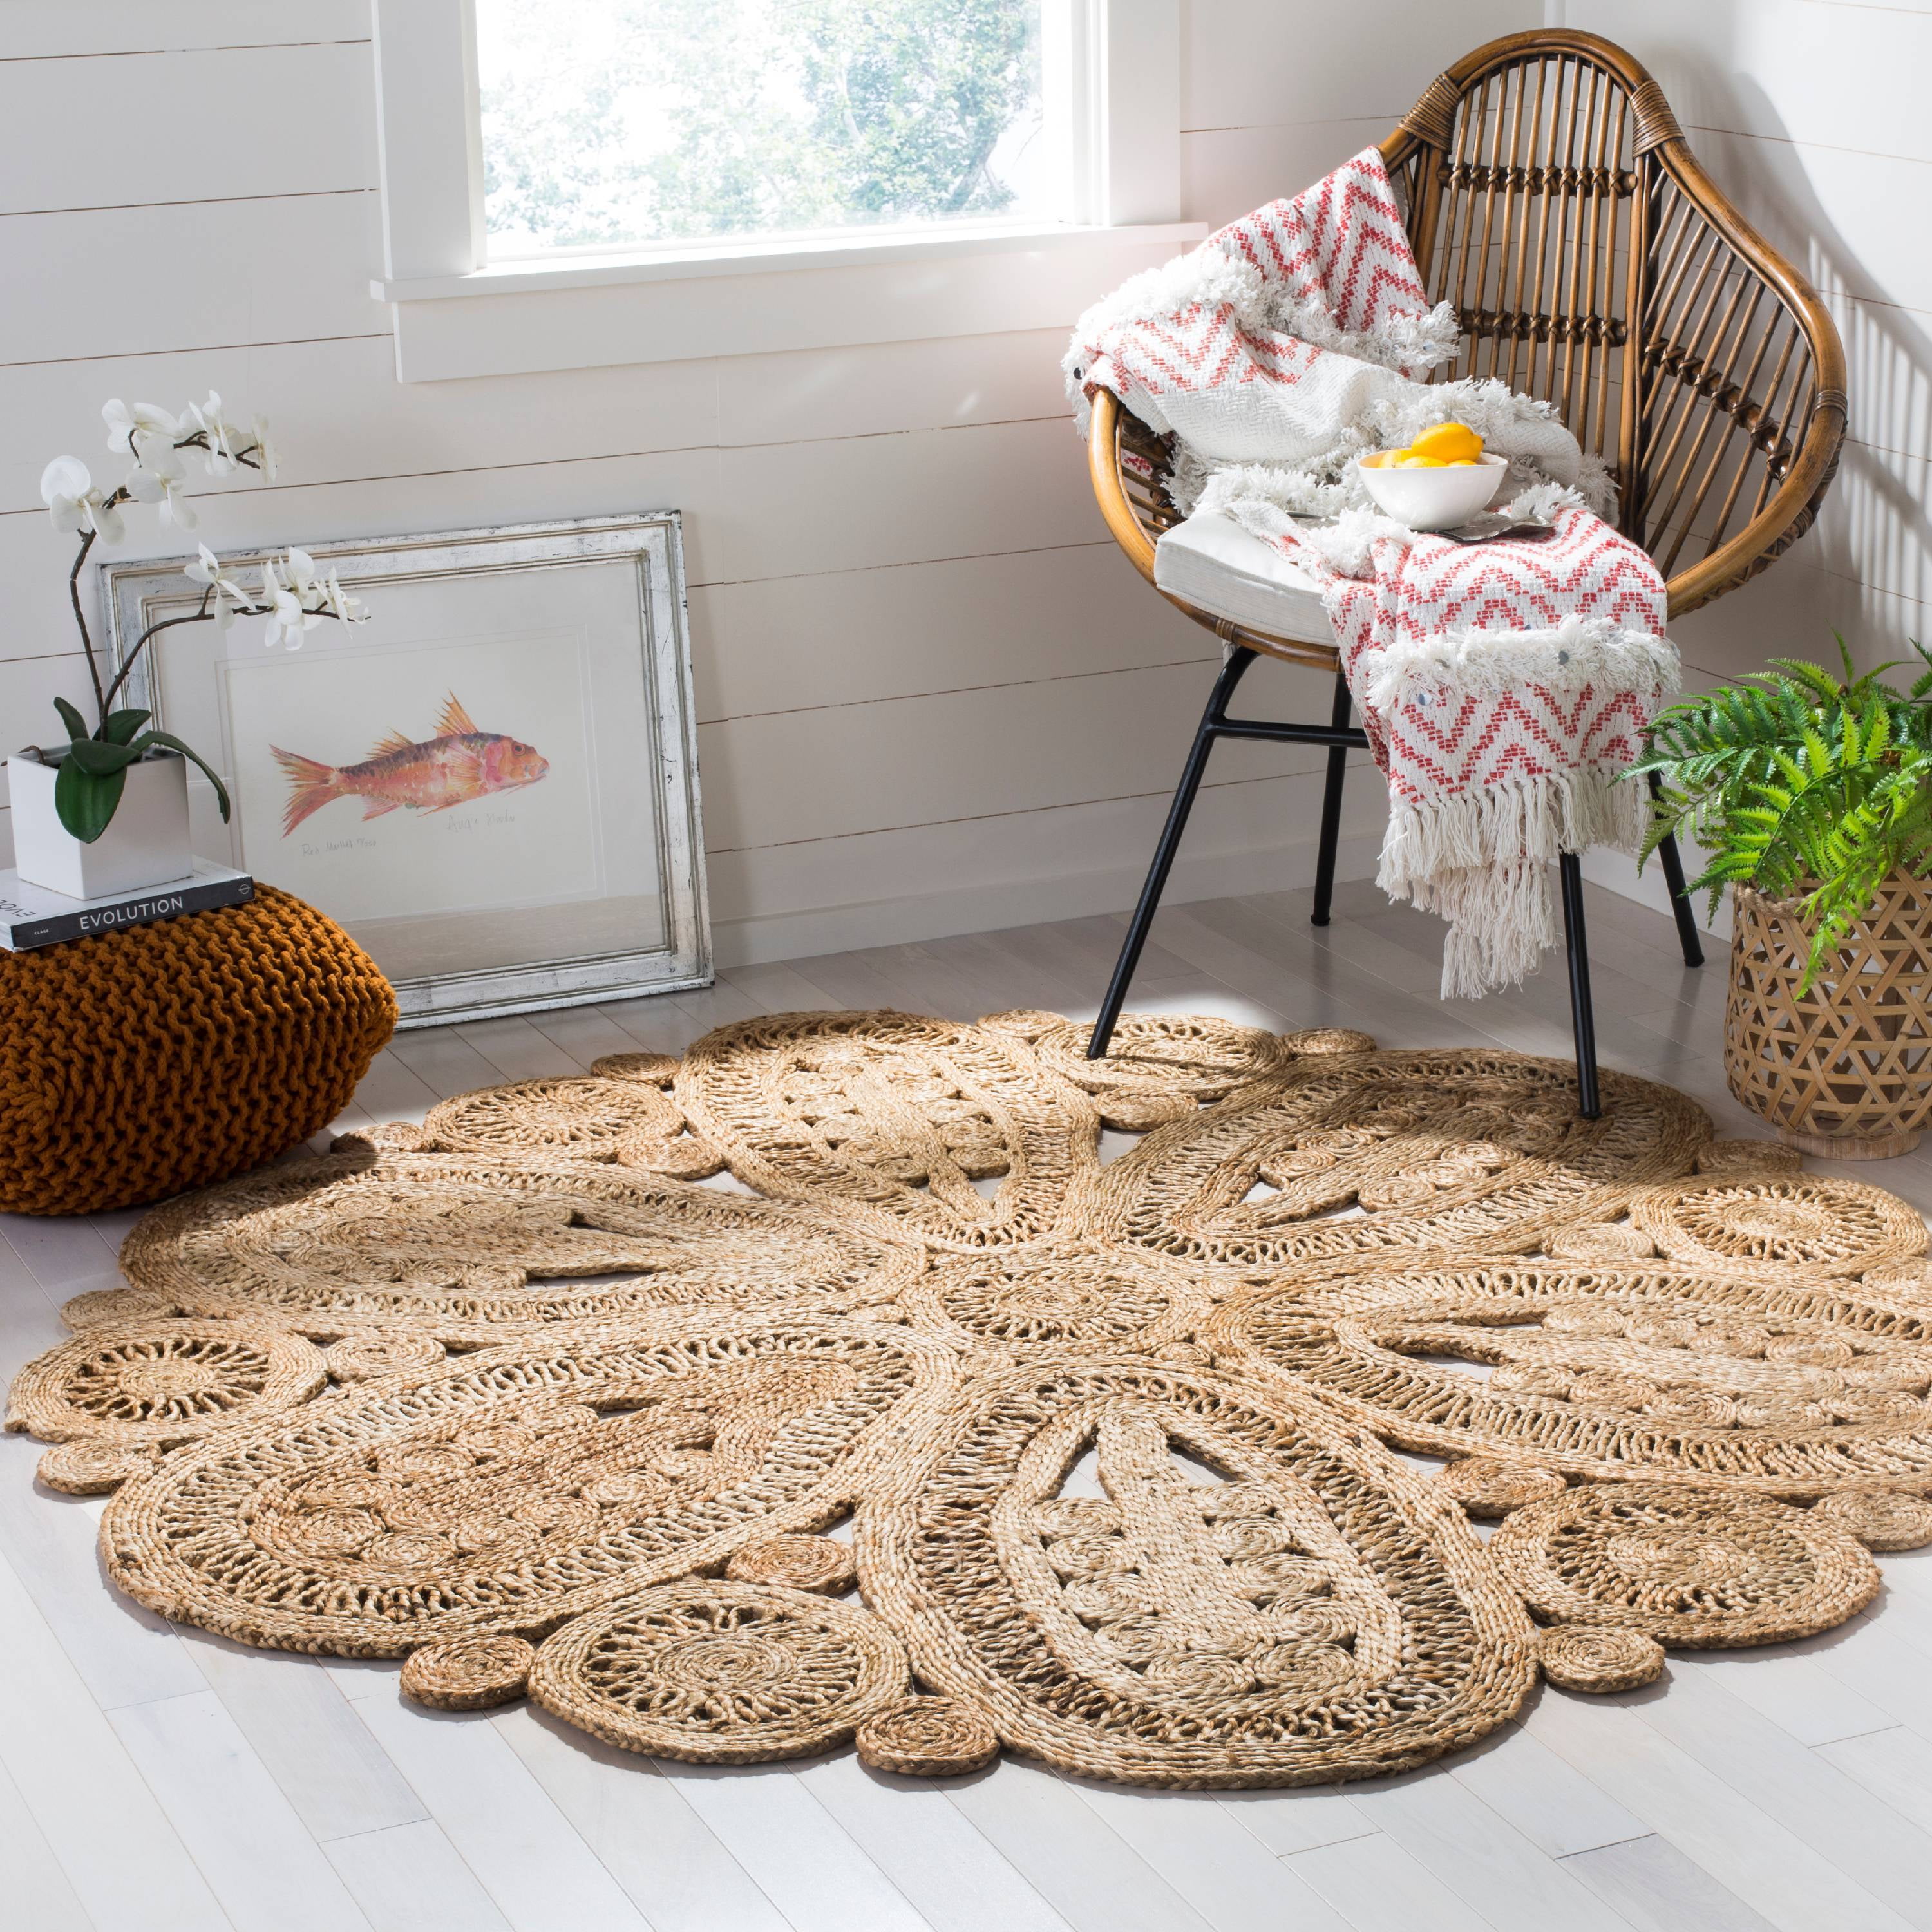 Braided Natural Hand Woven Round Multi Color 7 Feet Jute Rug Area Rug Carpet Mat 